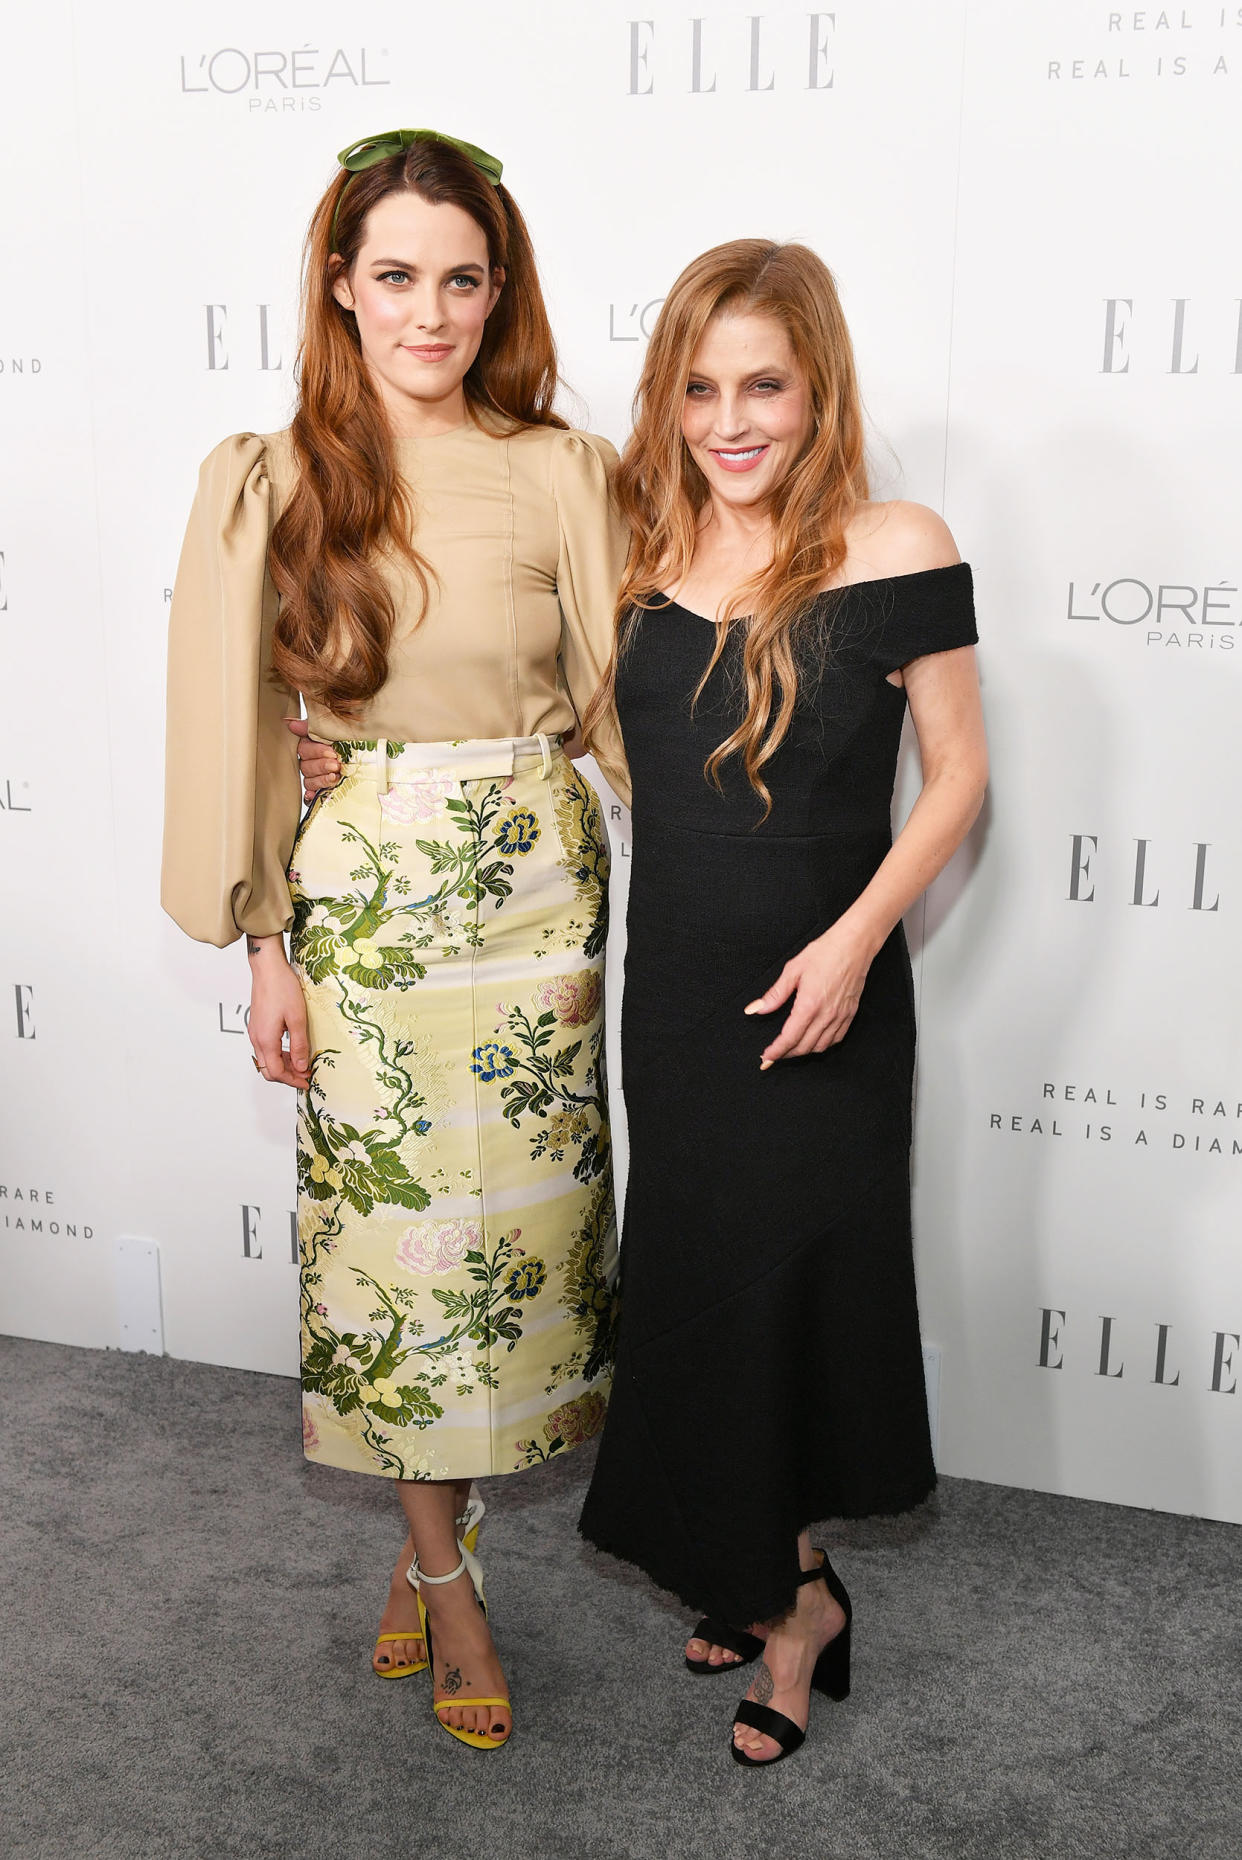  Riley Keough and Lisa Marie Presley attend ELLE's 24th Annual Women in Hollywood Celebration presented by L'Oreal Paris, Real Is Rare, Real Is A Diamond and CALVIN KLEIN at Four Seasons Hotel Los Angeles at Beverly Hills on October 16, 2017 in Los Angeles, California.   (Neilson Barnard / Getty Images for ELLE)